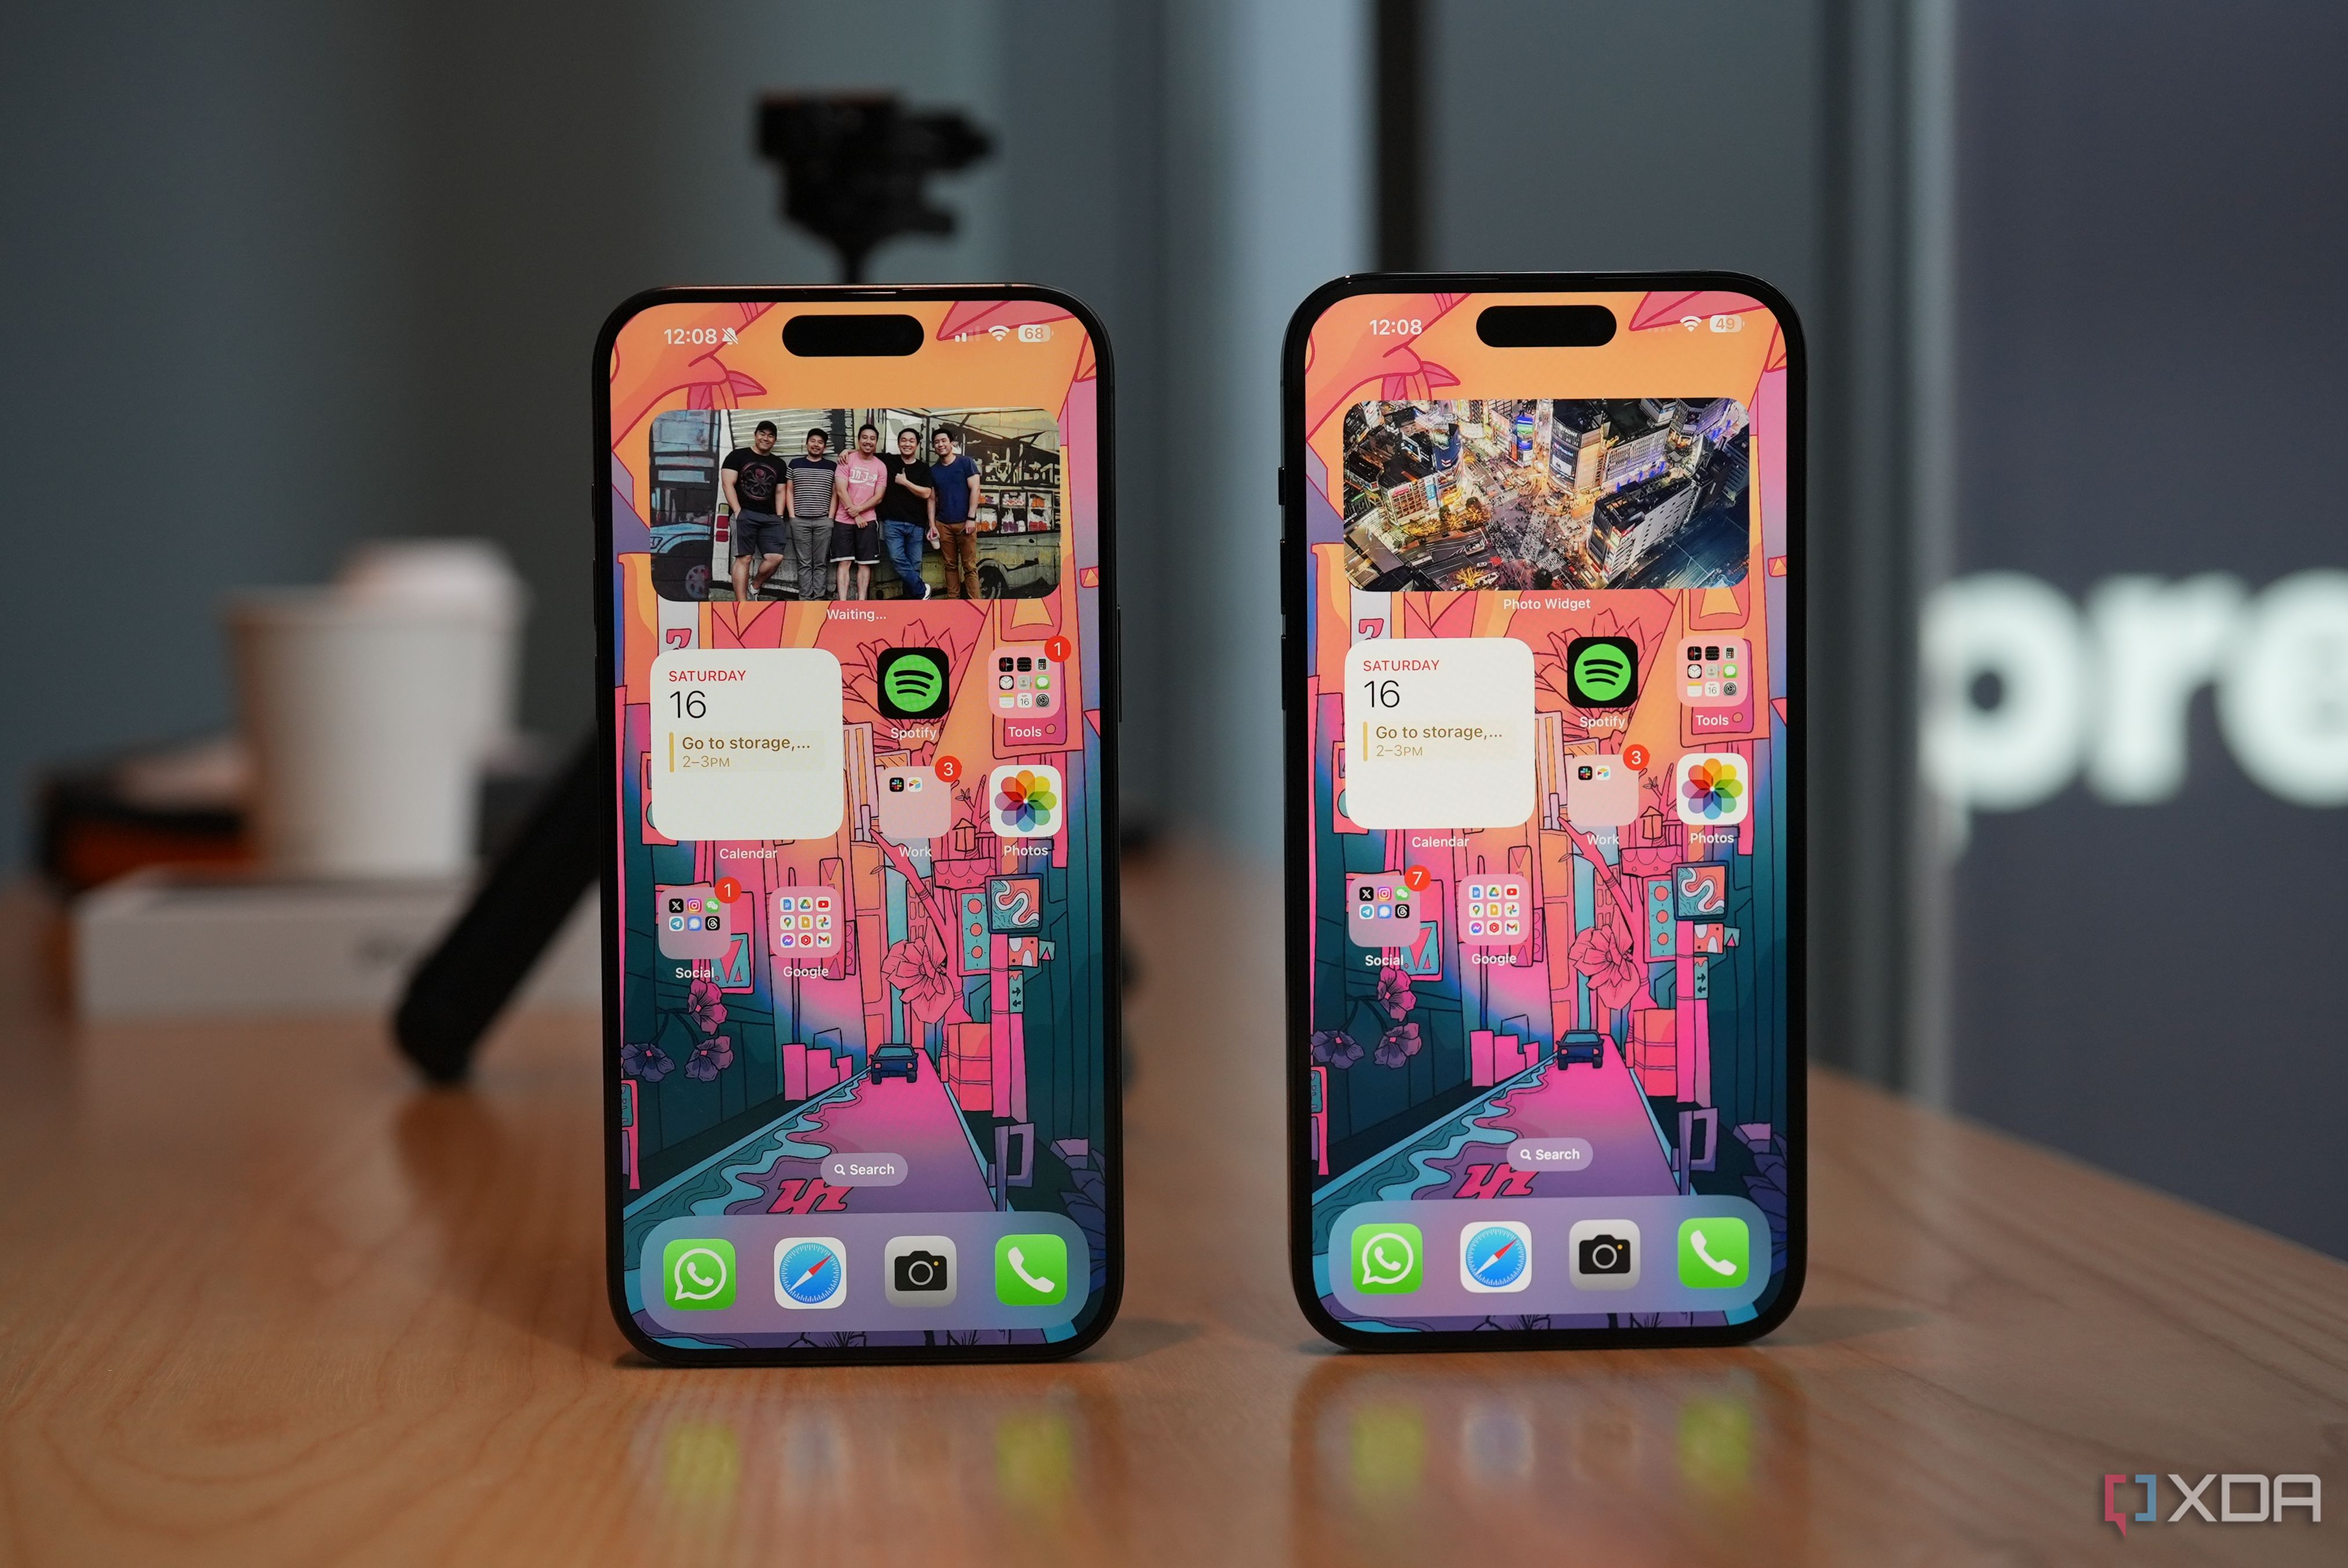 iPhone 15 Pro Max (left) and iPhone 14 Pro Max (right). The iPhone 15 Pro Max appears to have thinner bezels, but it's all due to the slimmer titanium frame.